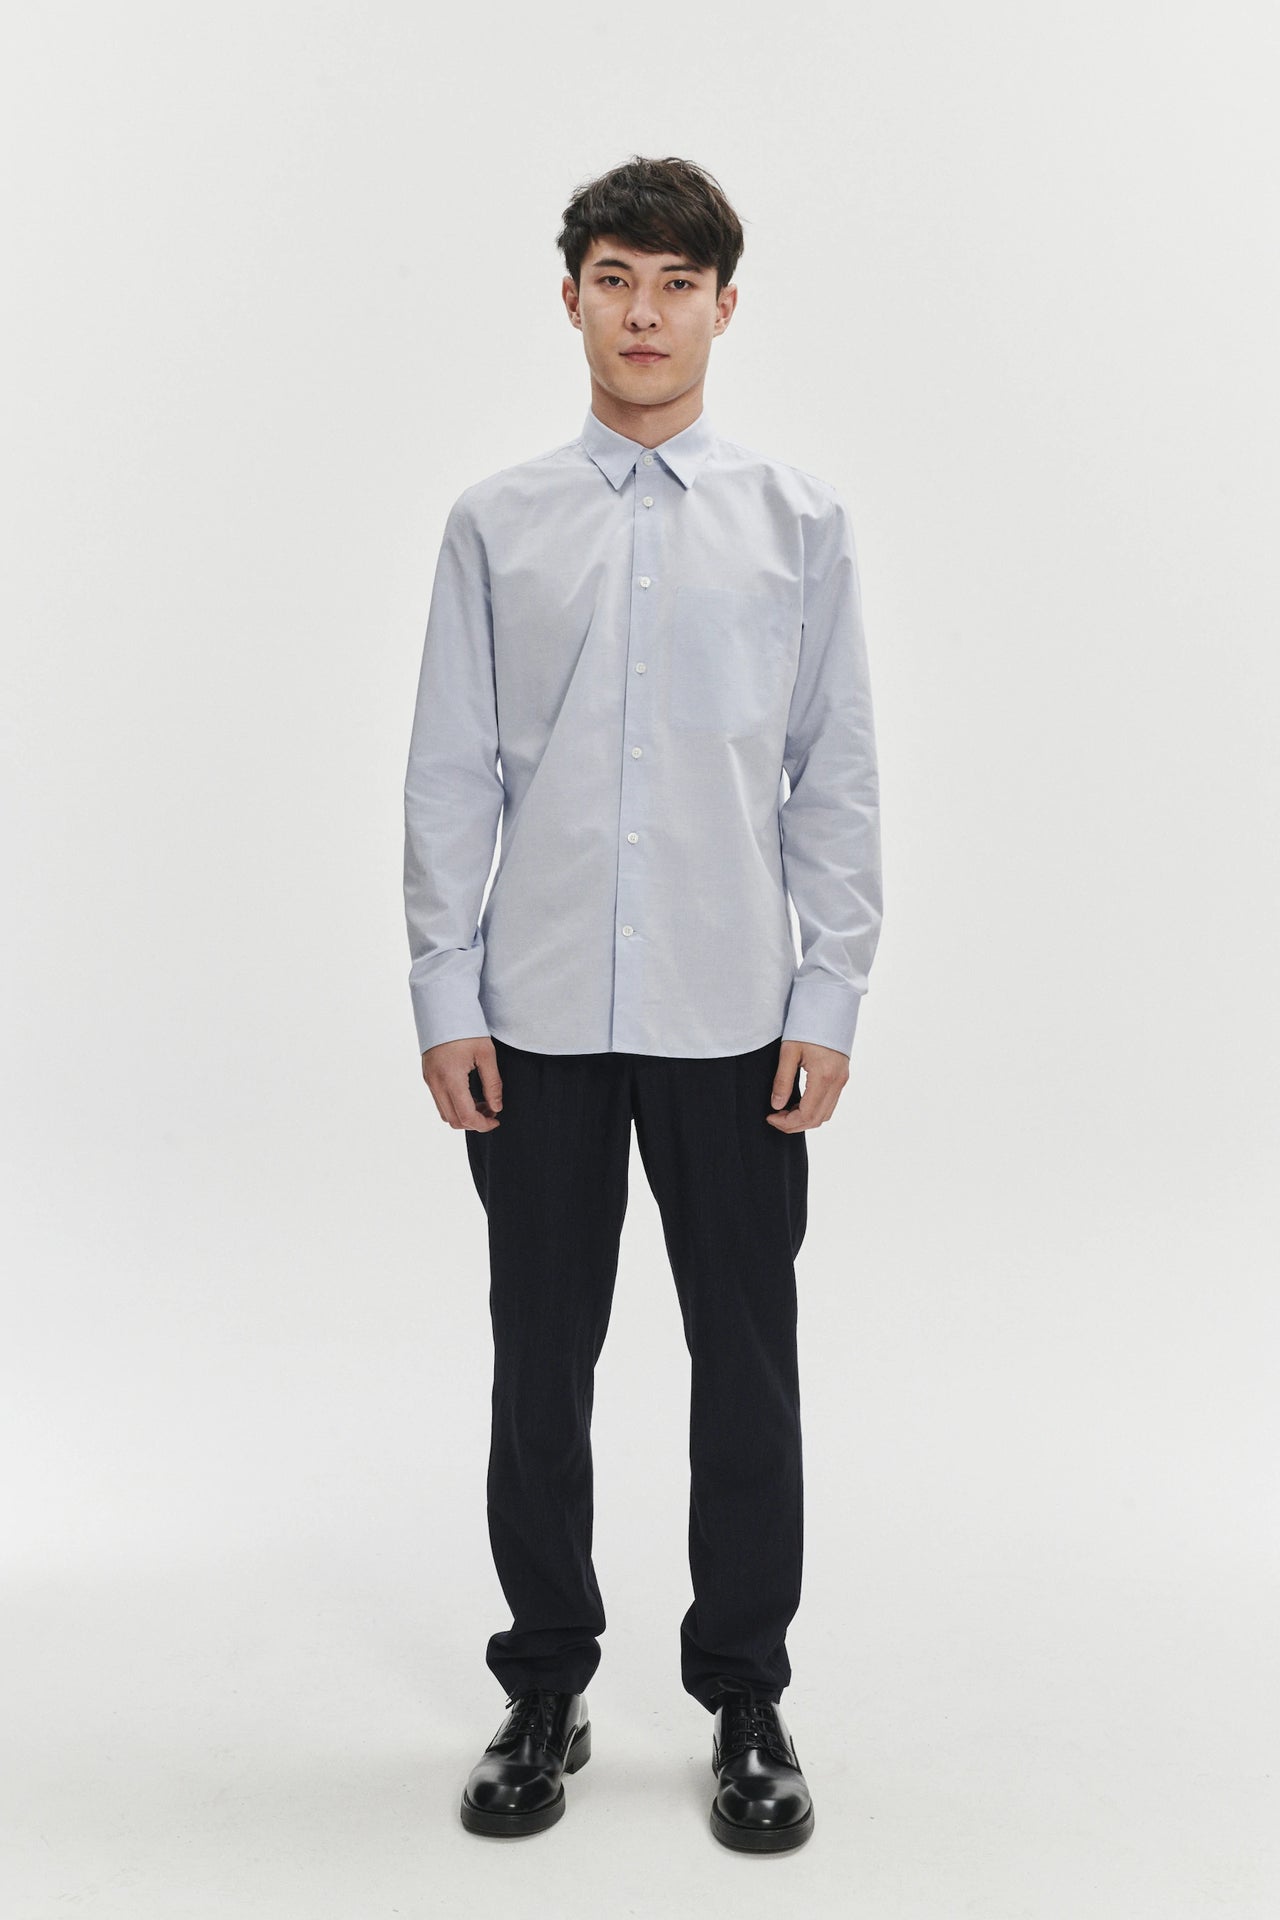 Feel Good Shirt in the Finest Light Blue Mini Structure Italian Cotton by Albini